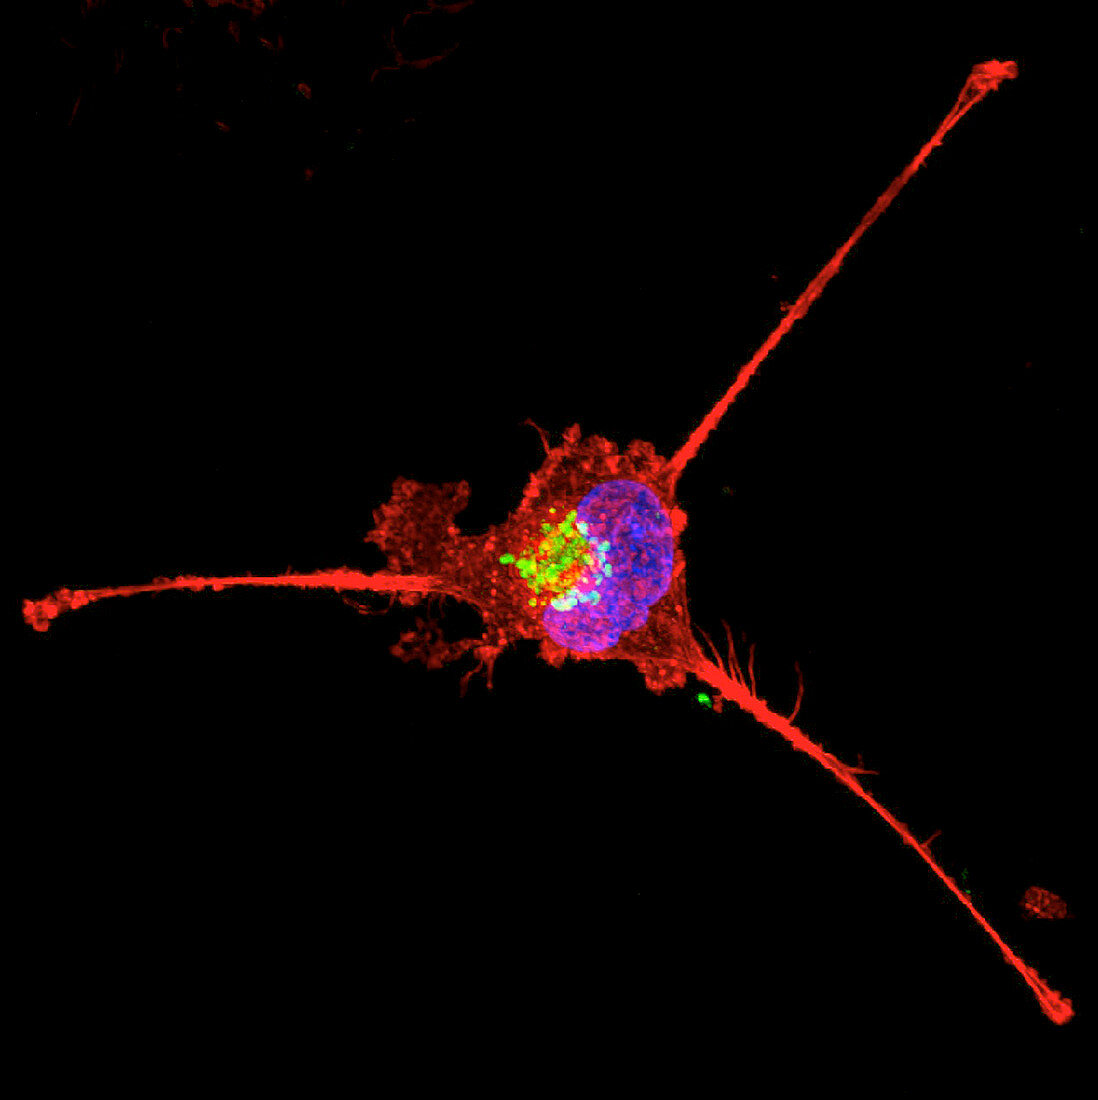 Triple-negative breast cancer cell